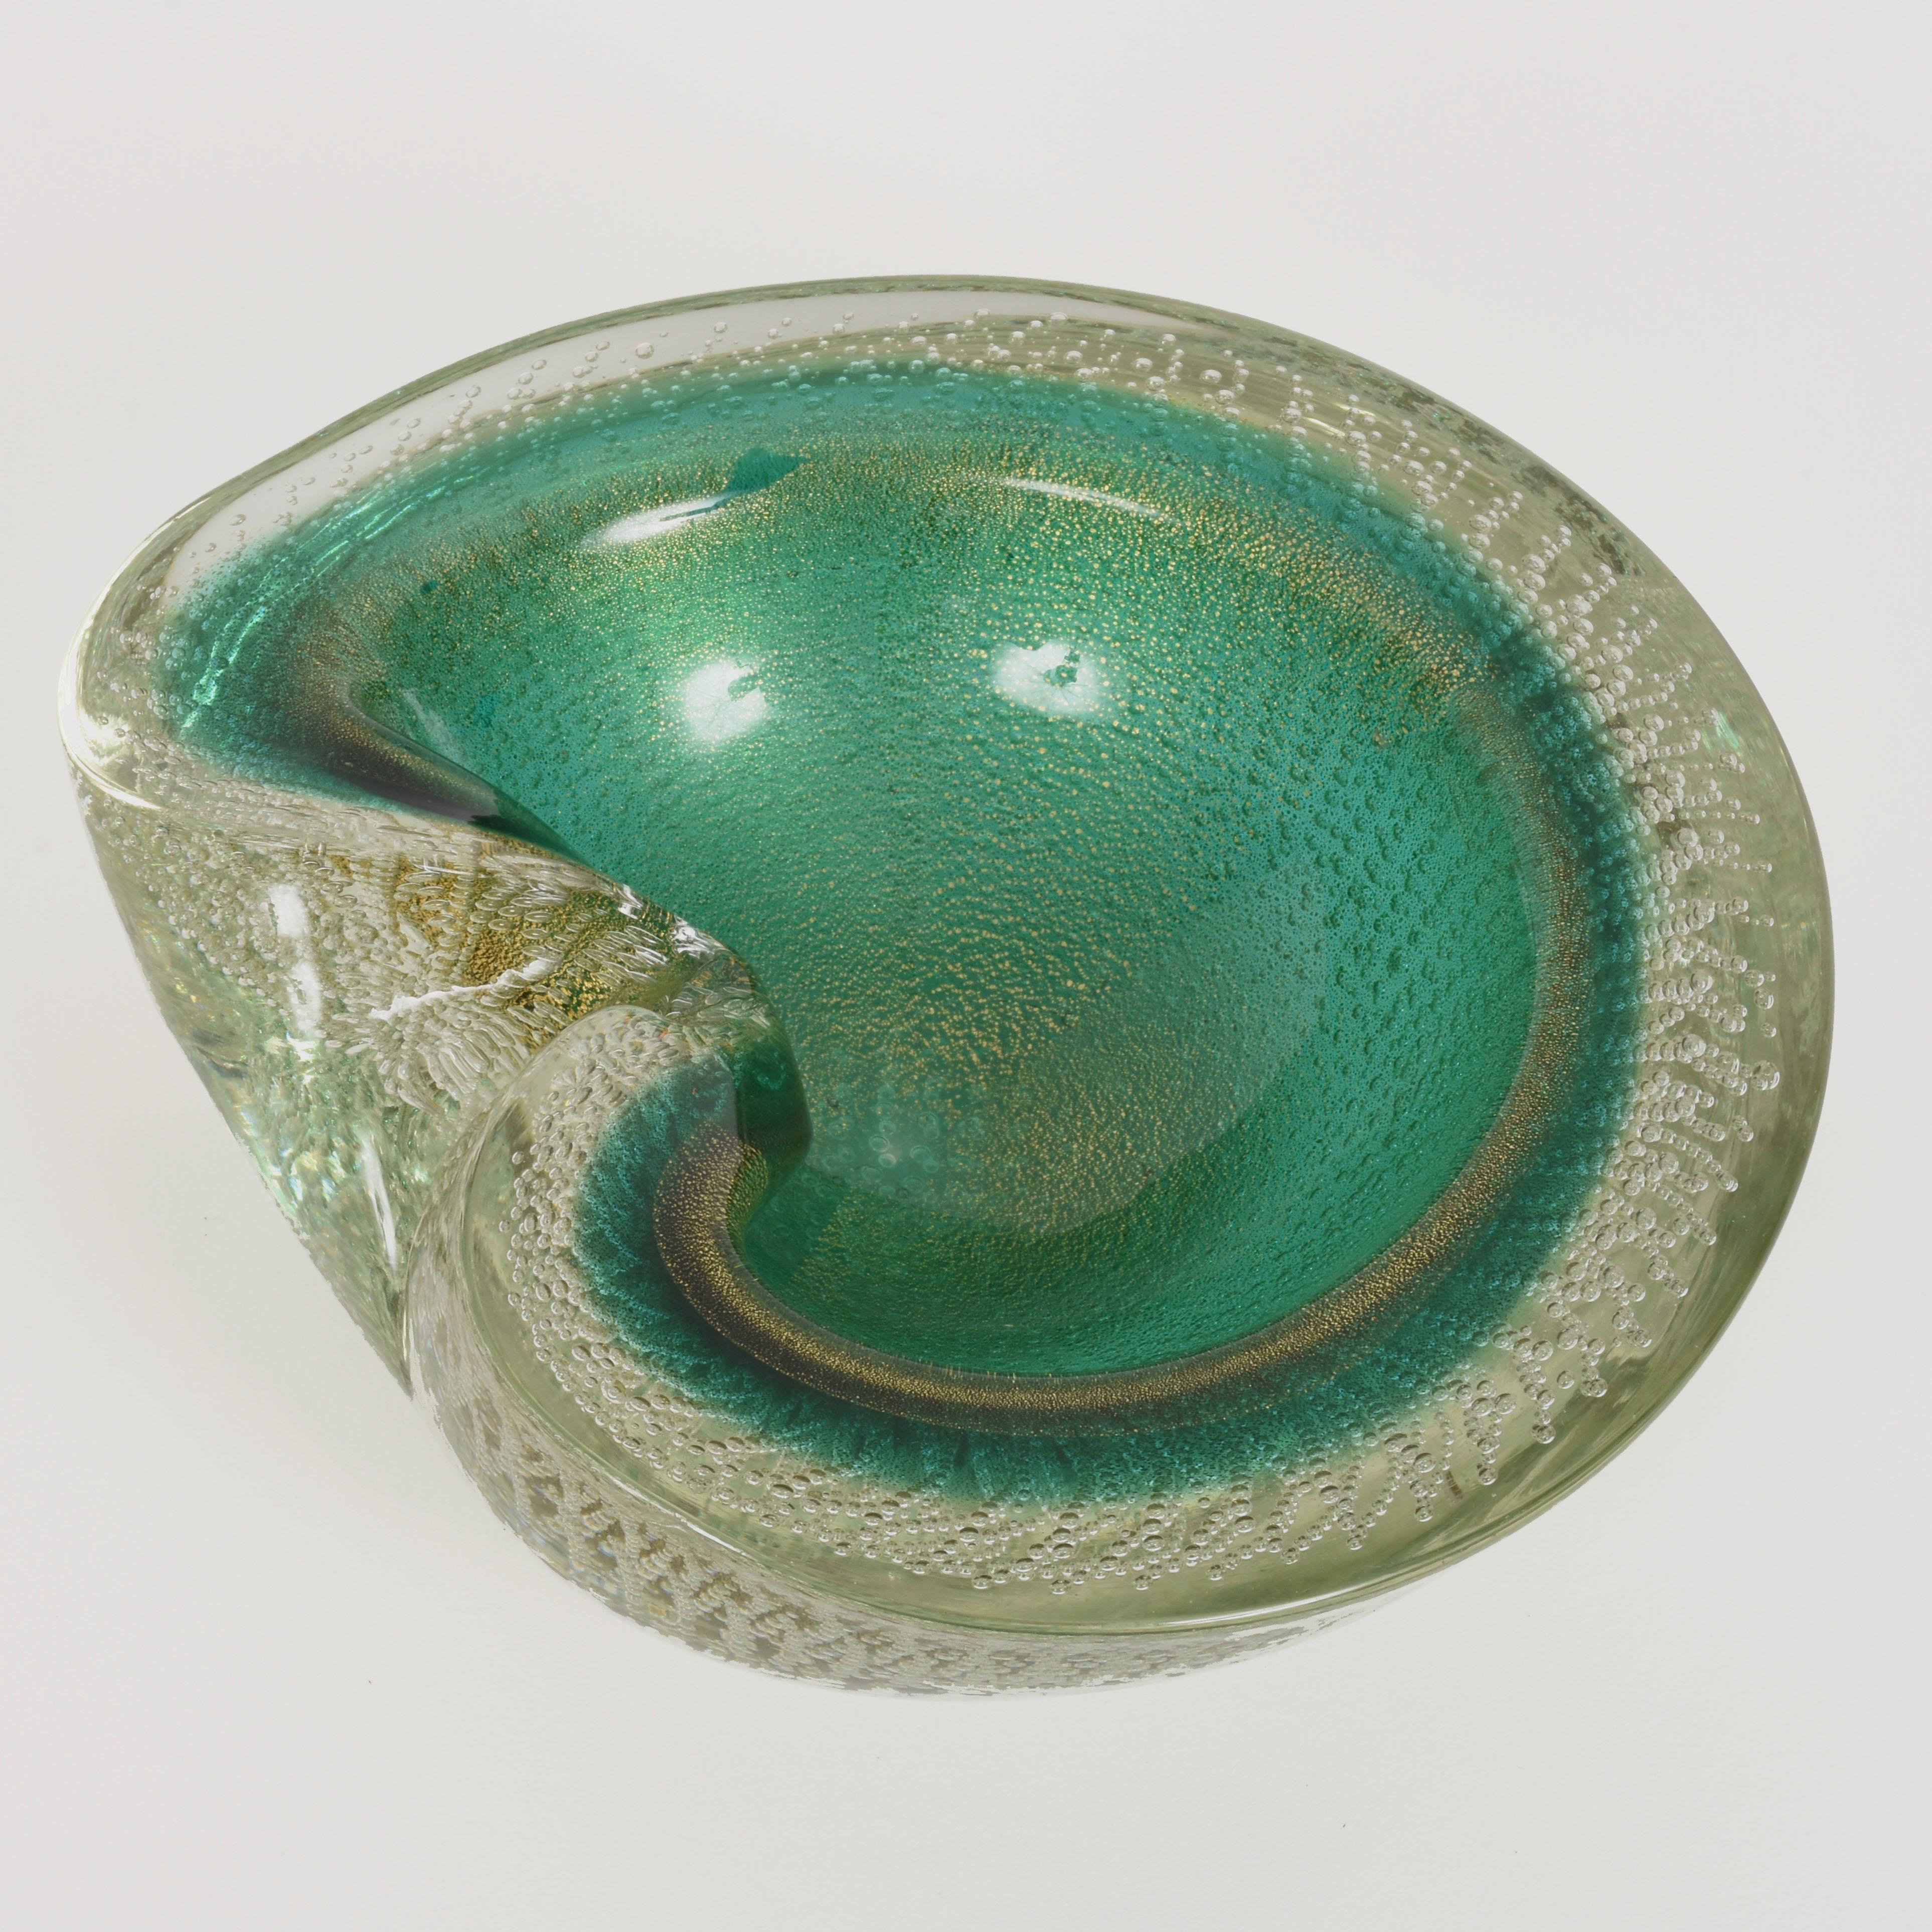 Stunning midcentury green and gold Murano glass bowl or ashtray. This handmade item was produced in Italy during 1960 and it is attributed to Archimede Seguso.

This piece is unique as made with the 